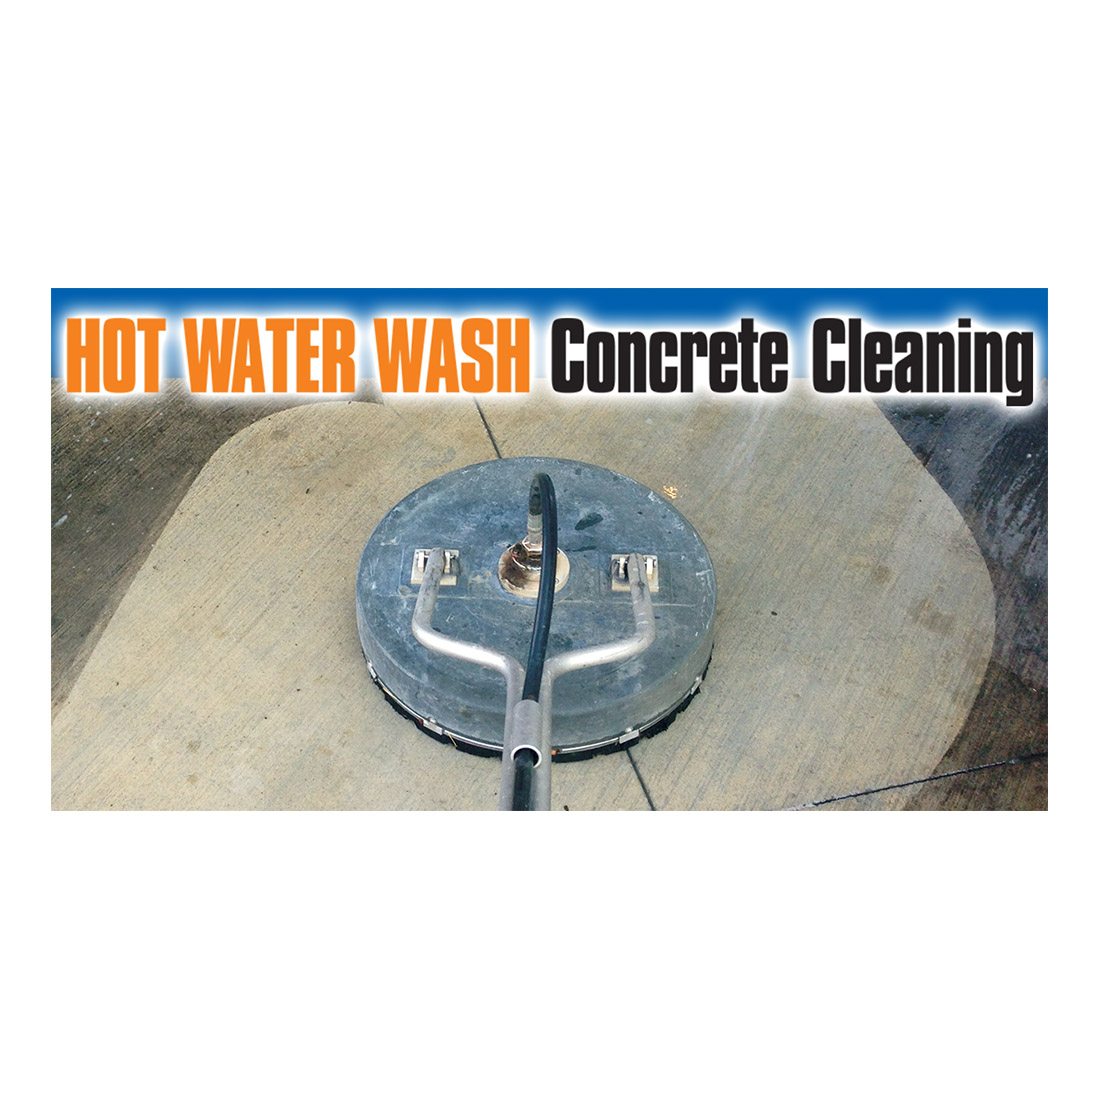 Concrete Cleaning - No Logo - Facebook Ad View